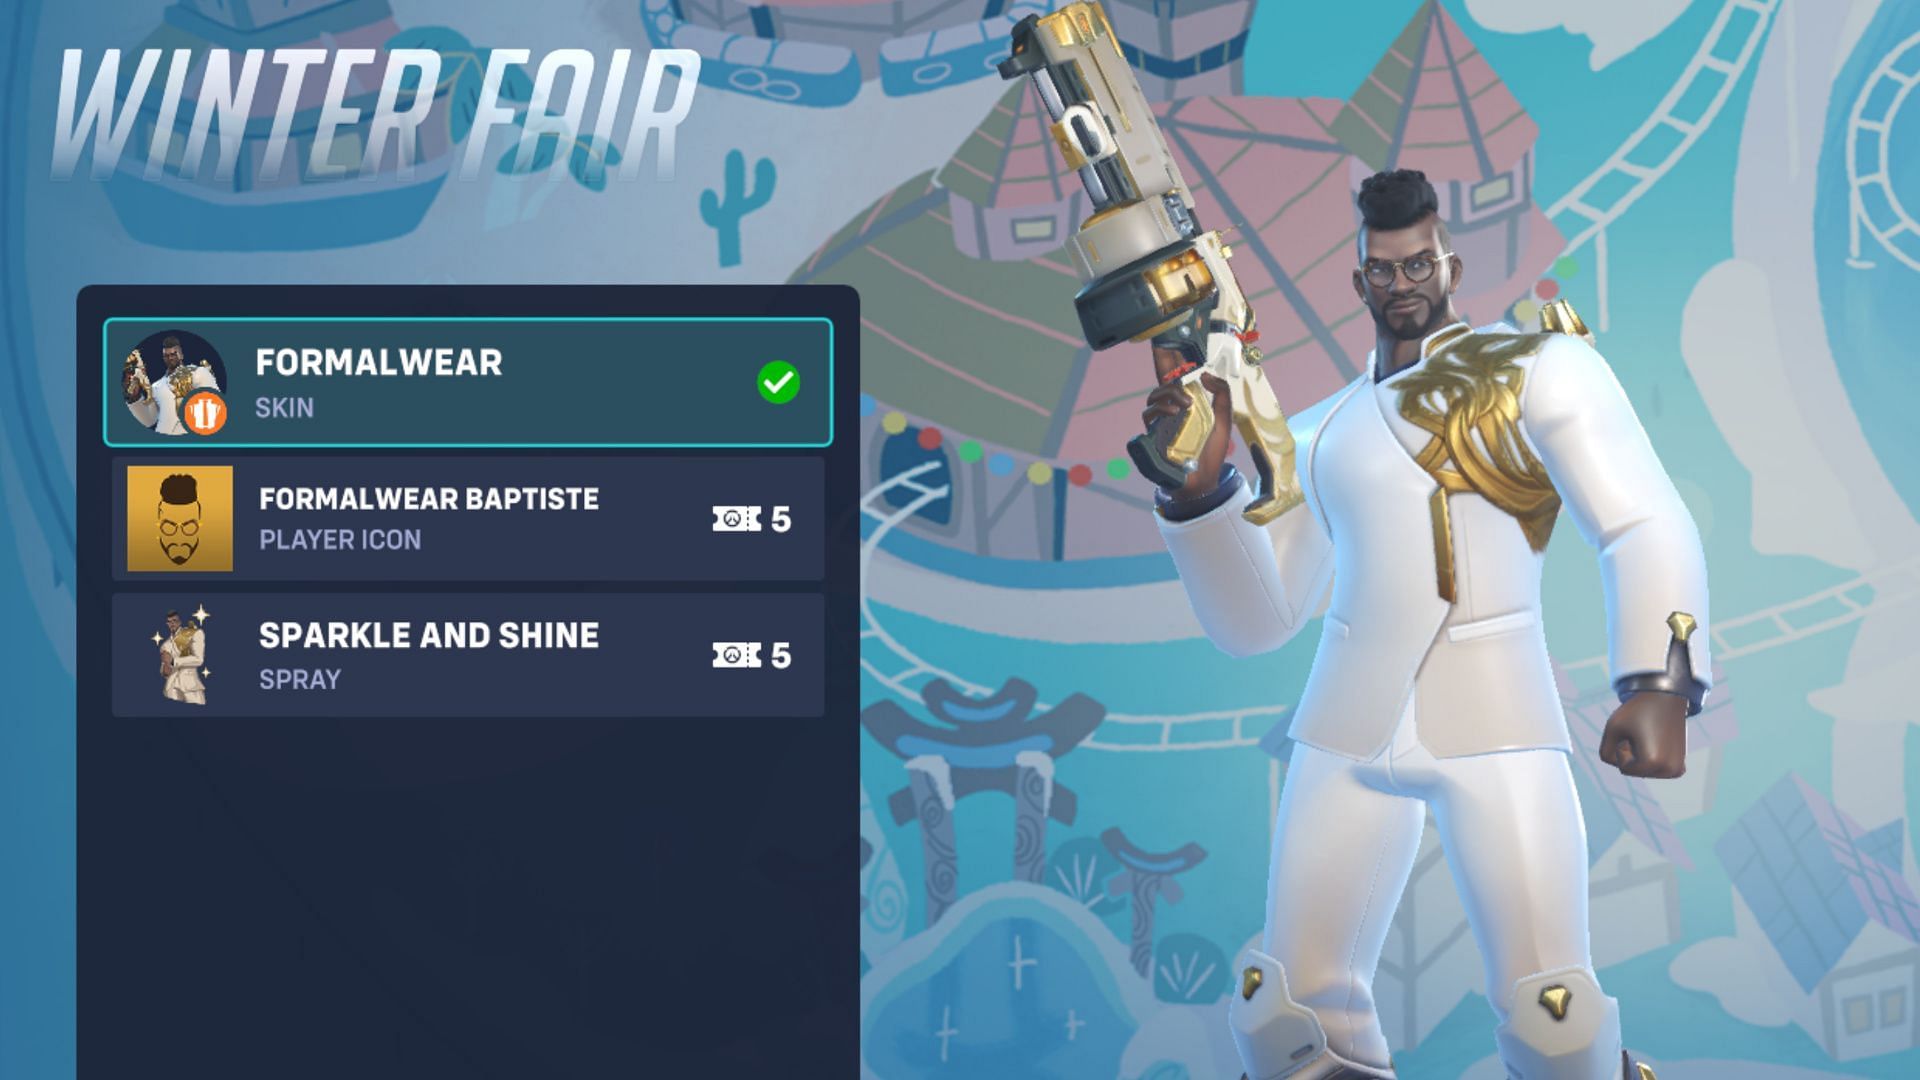 This is one of the more aesthetic skins from the Winter Fair (Image via Overwatch 2)